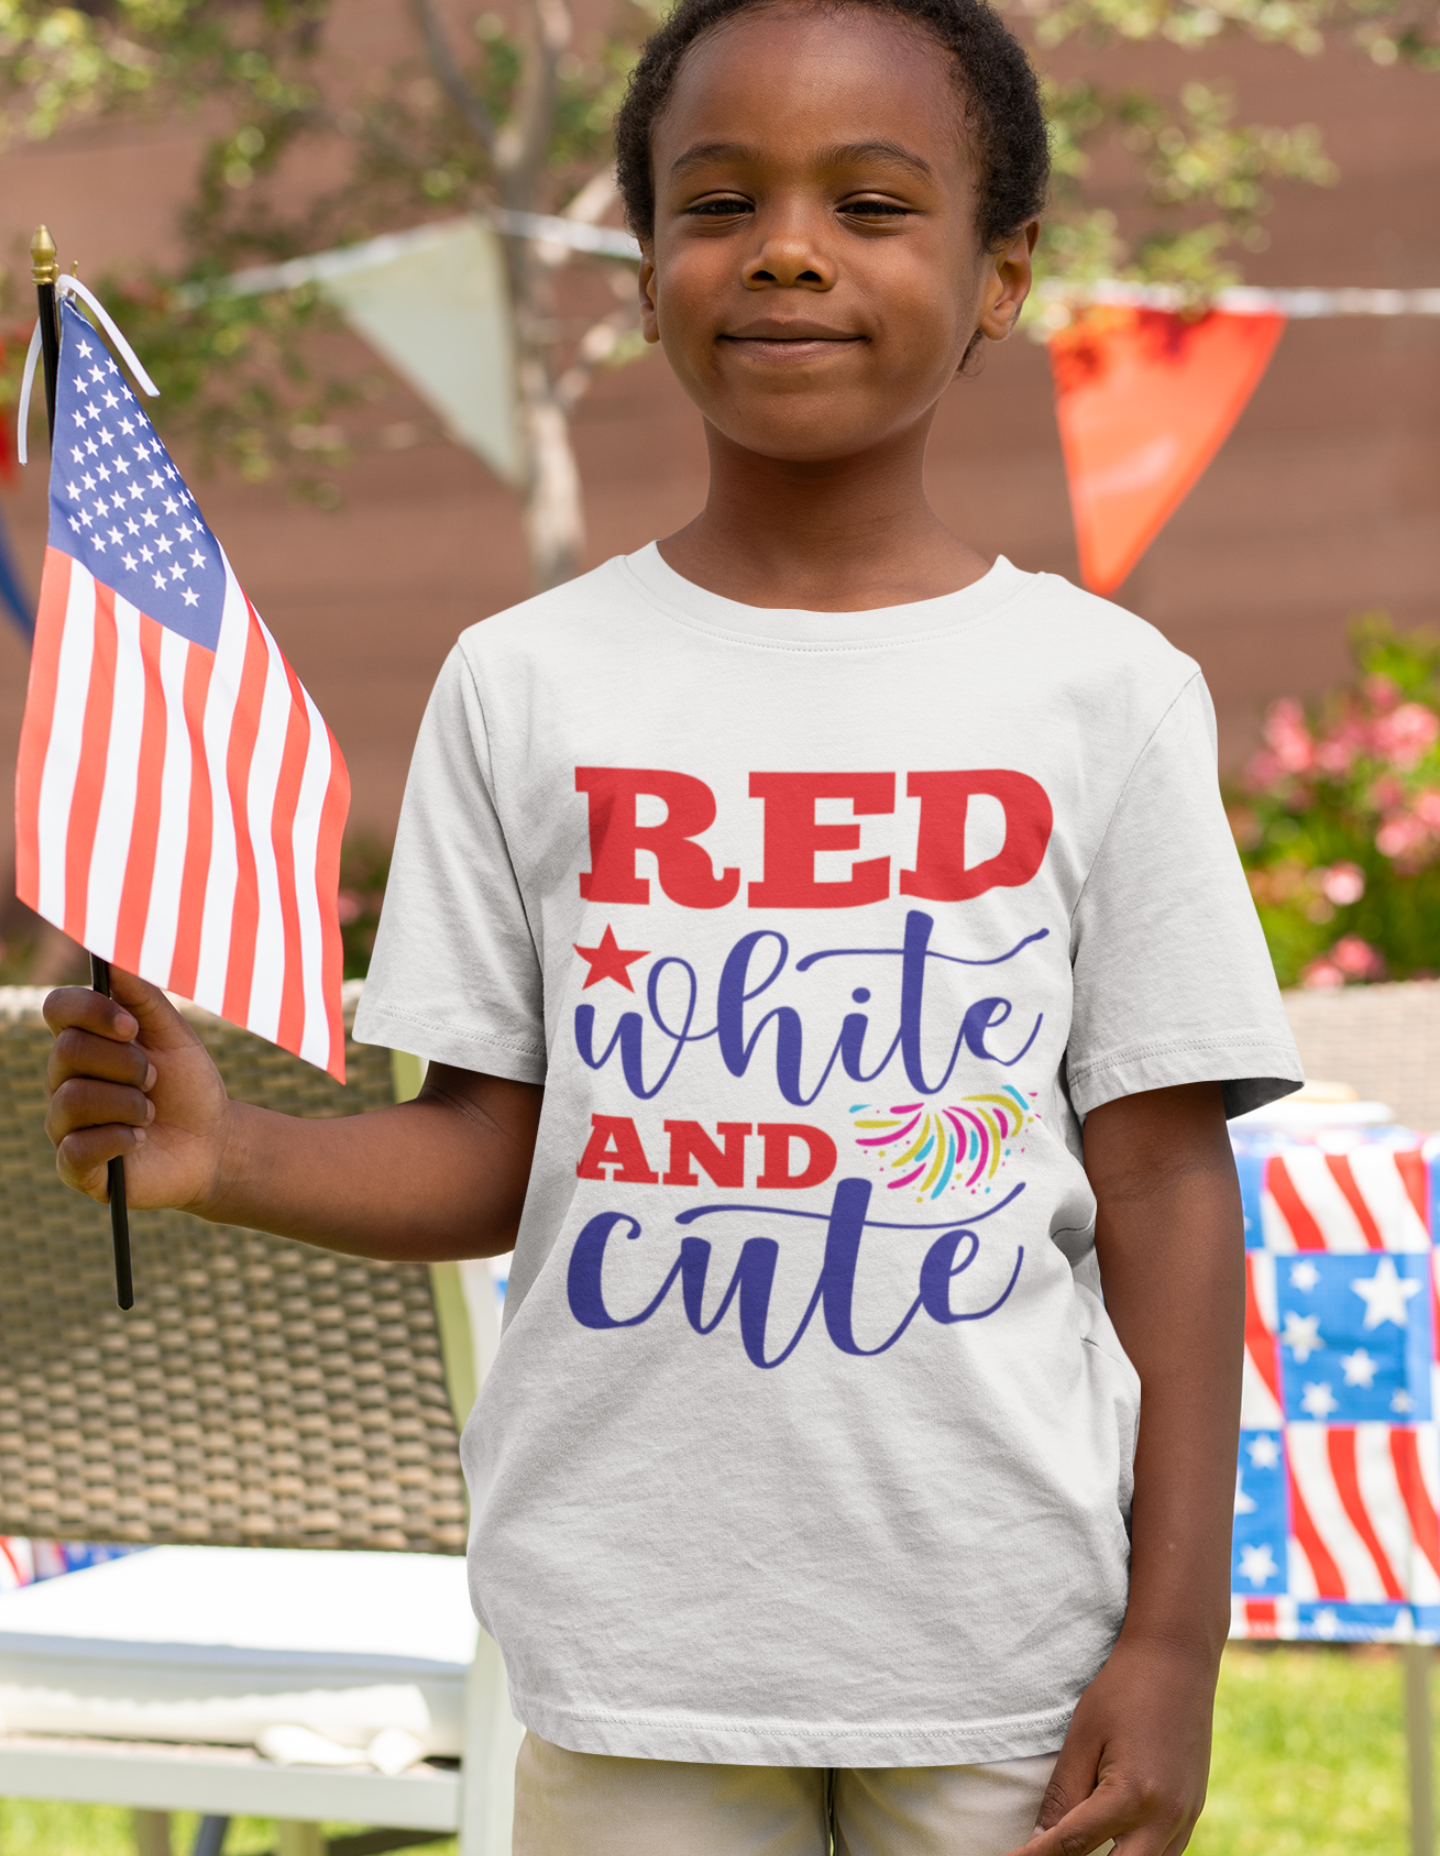 Get trendy with Red White and Cute Kids Heavy Cotton™ Tee - Kids clothes available at Good Gift Company. Grab yours for $10.78 today!